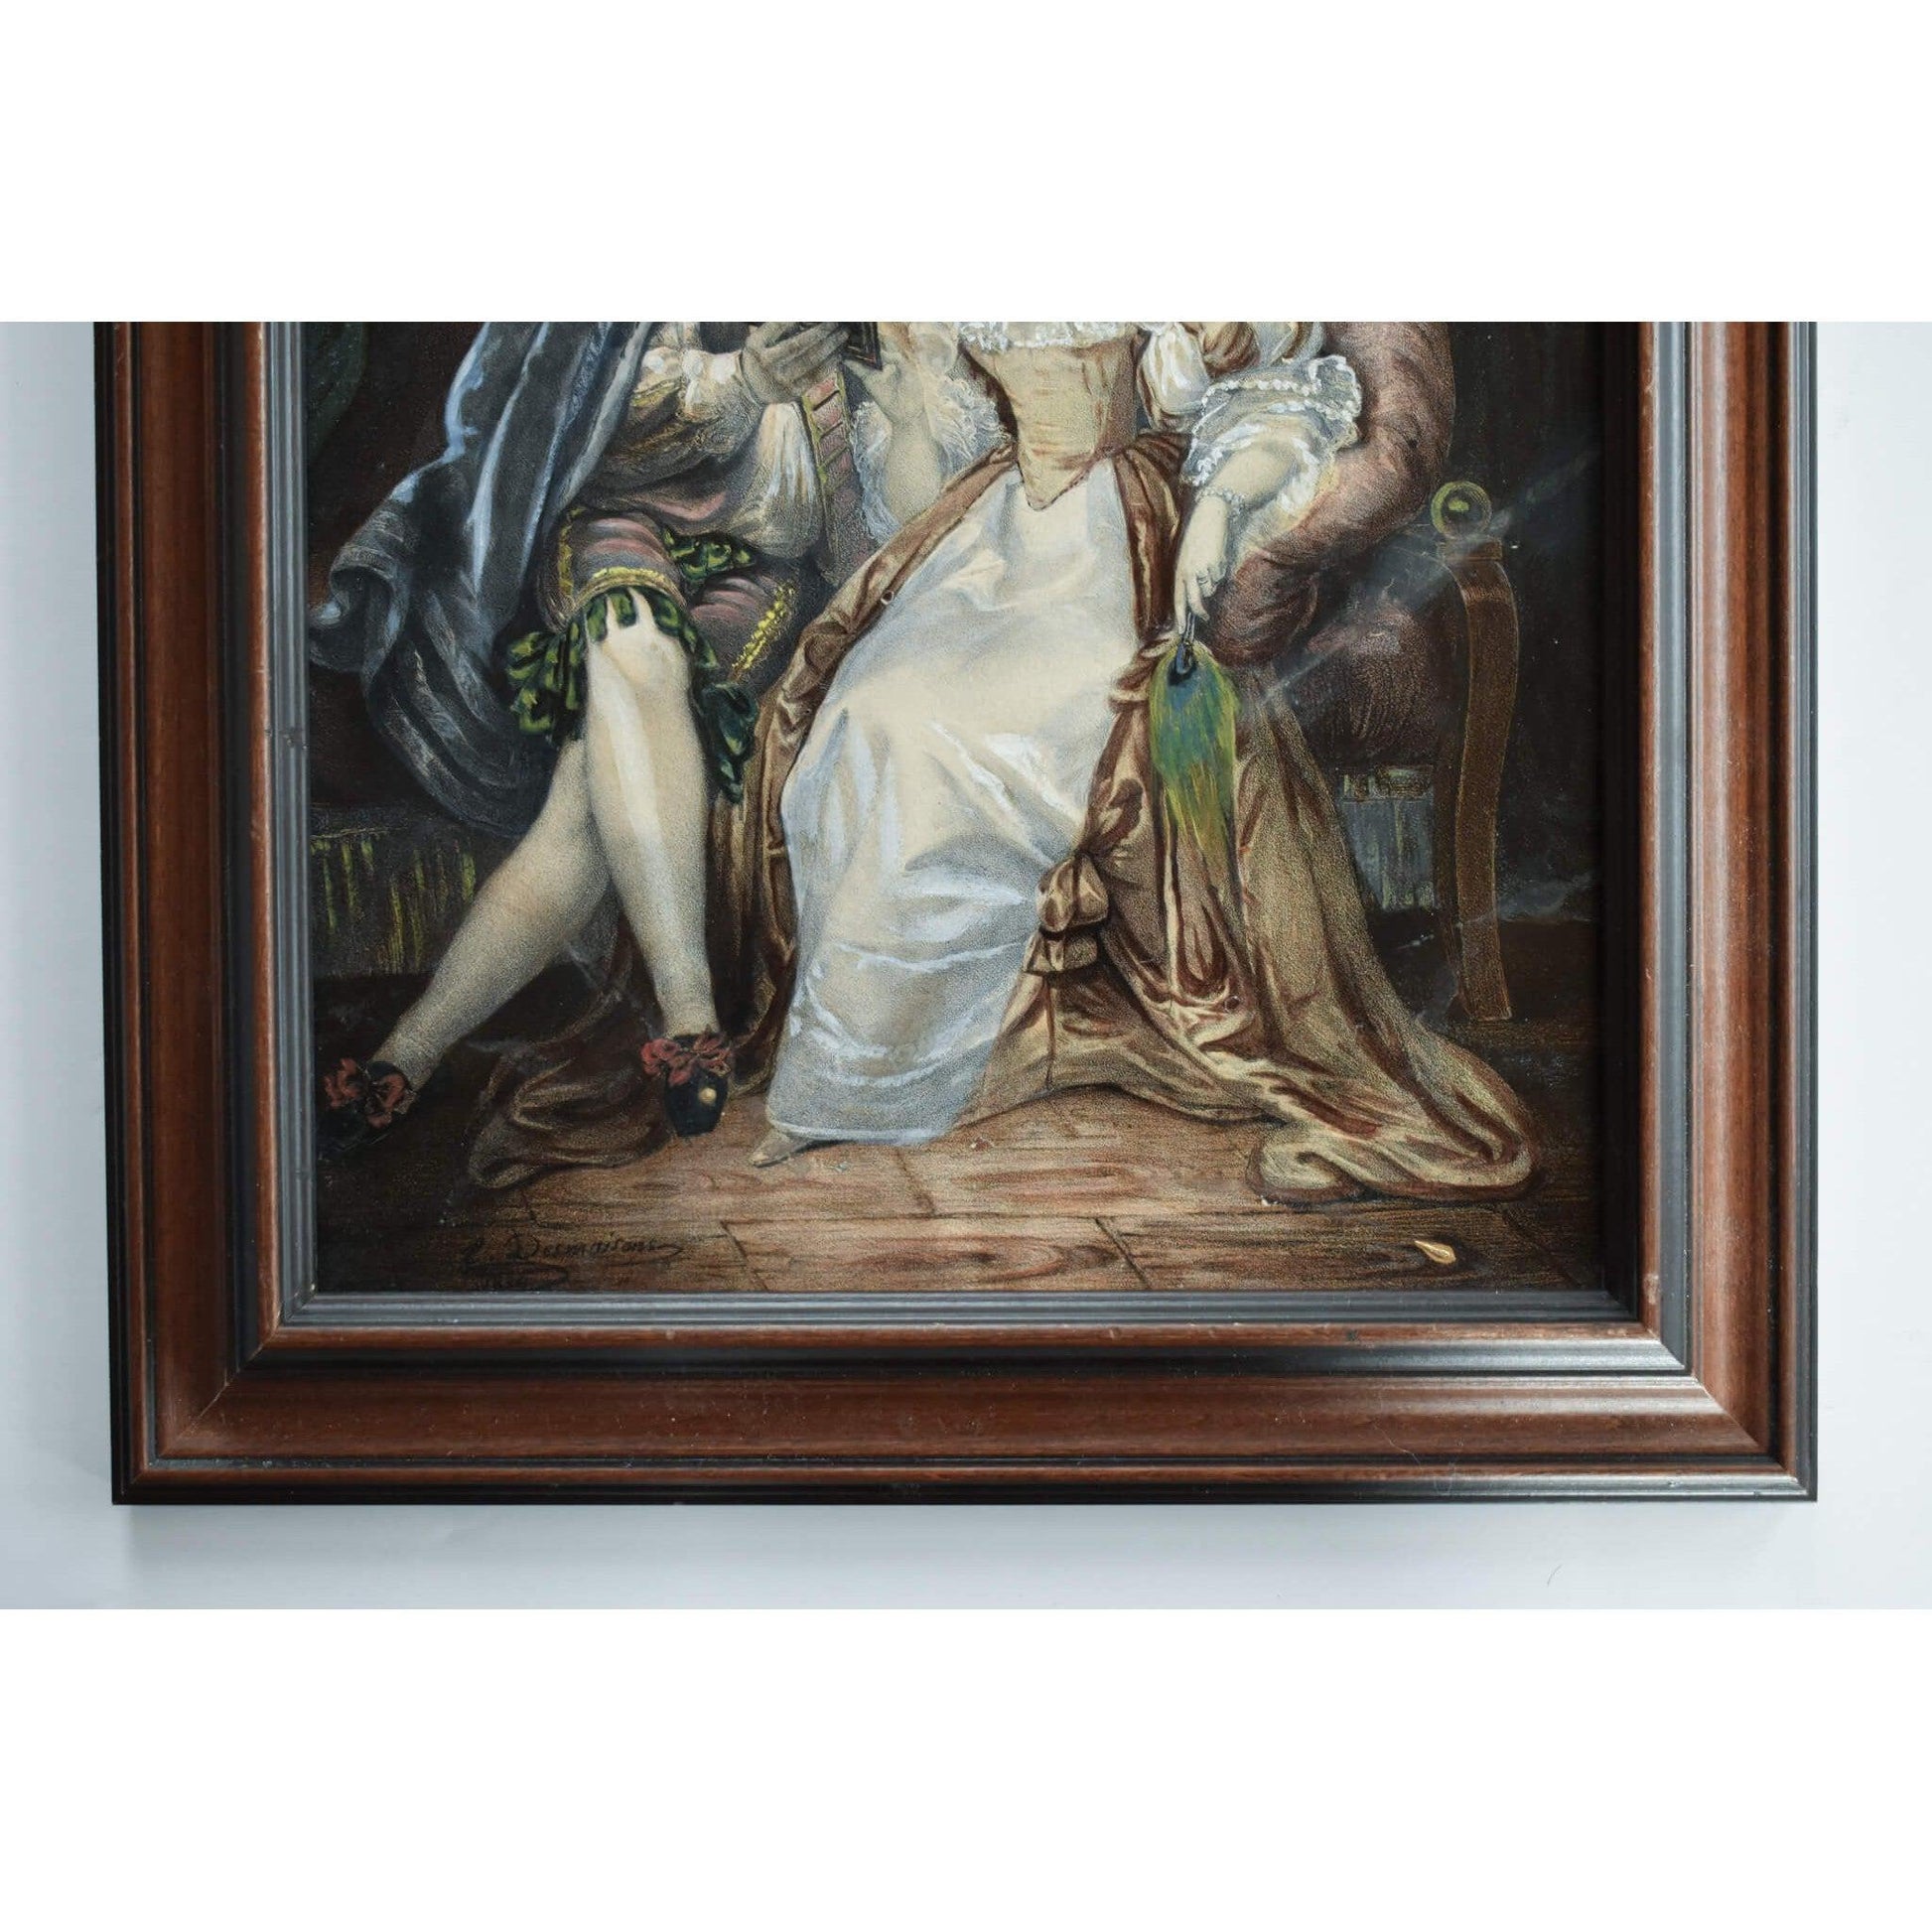 Antique original chromolithograph genre scene, signed and dated 1834 by Émile Desmaisons. For sale at Winckelmann Gallery.